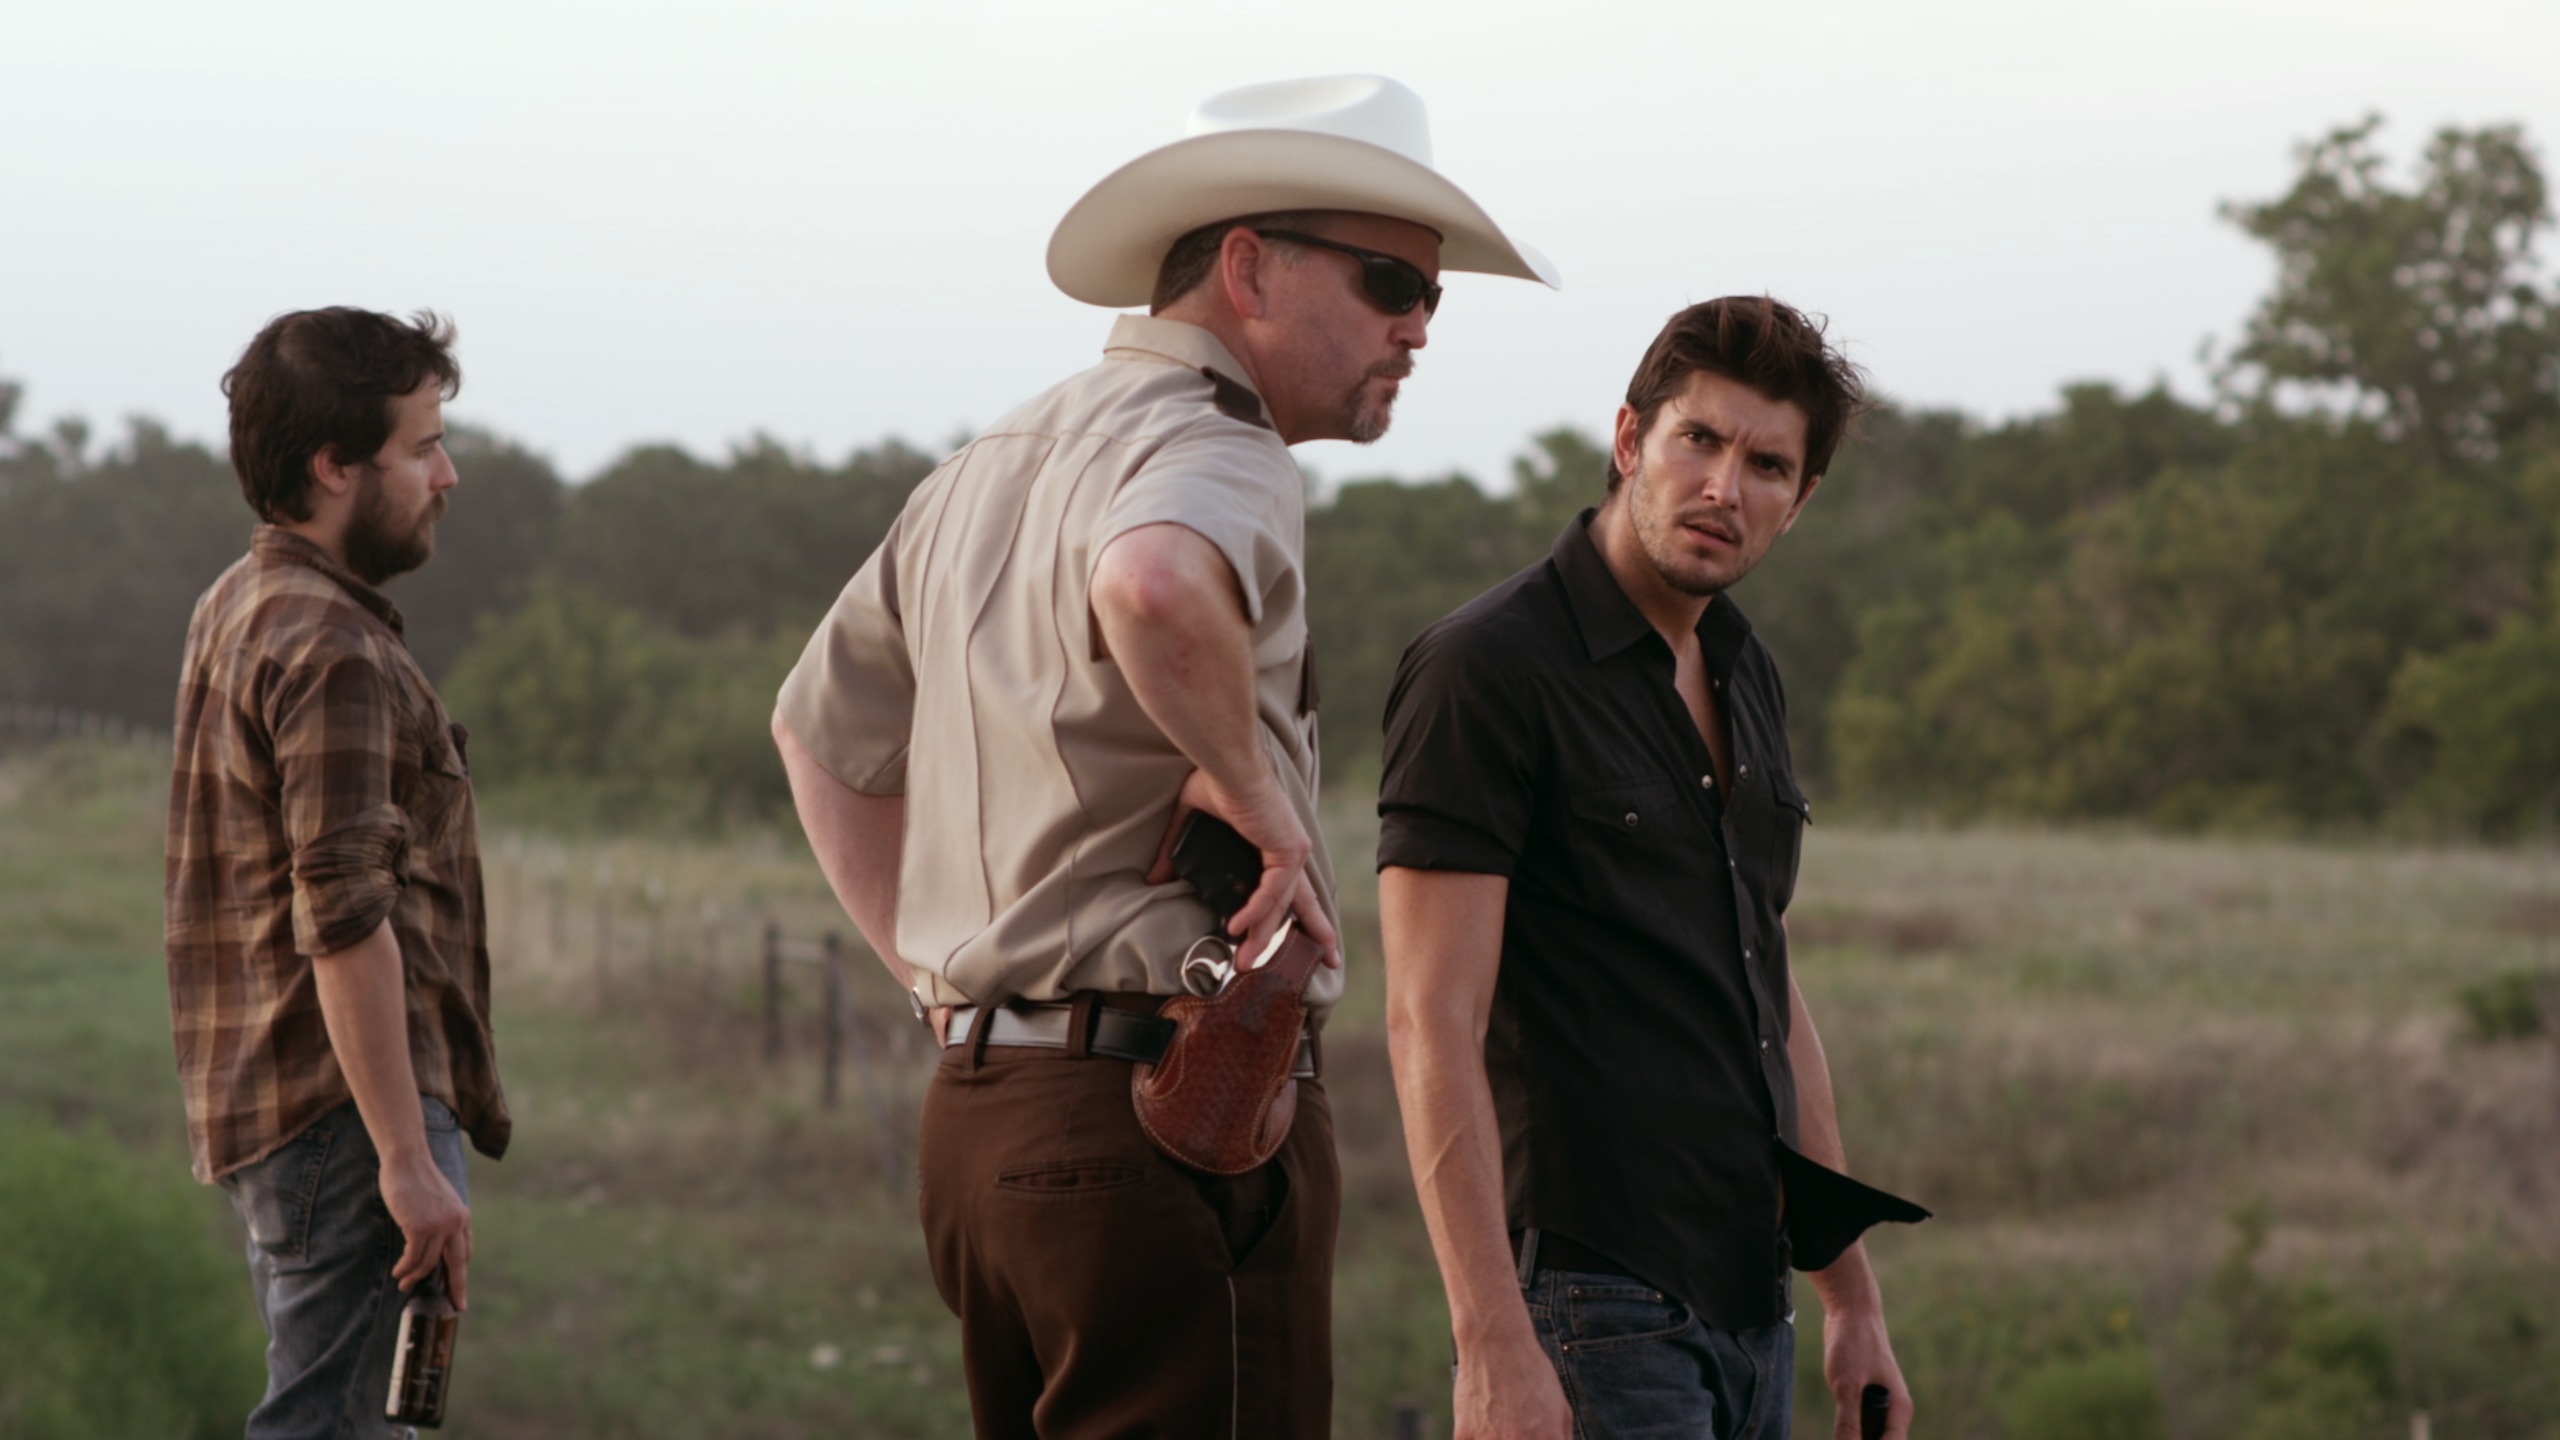 Still shot of Frank Mosley, Brent Anderson, and Rett Terrell in GALLOWS ROAD